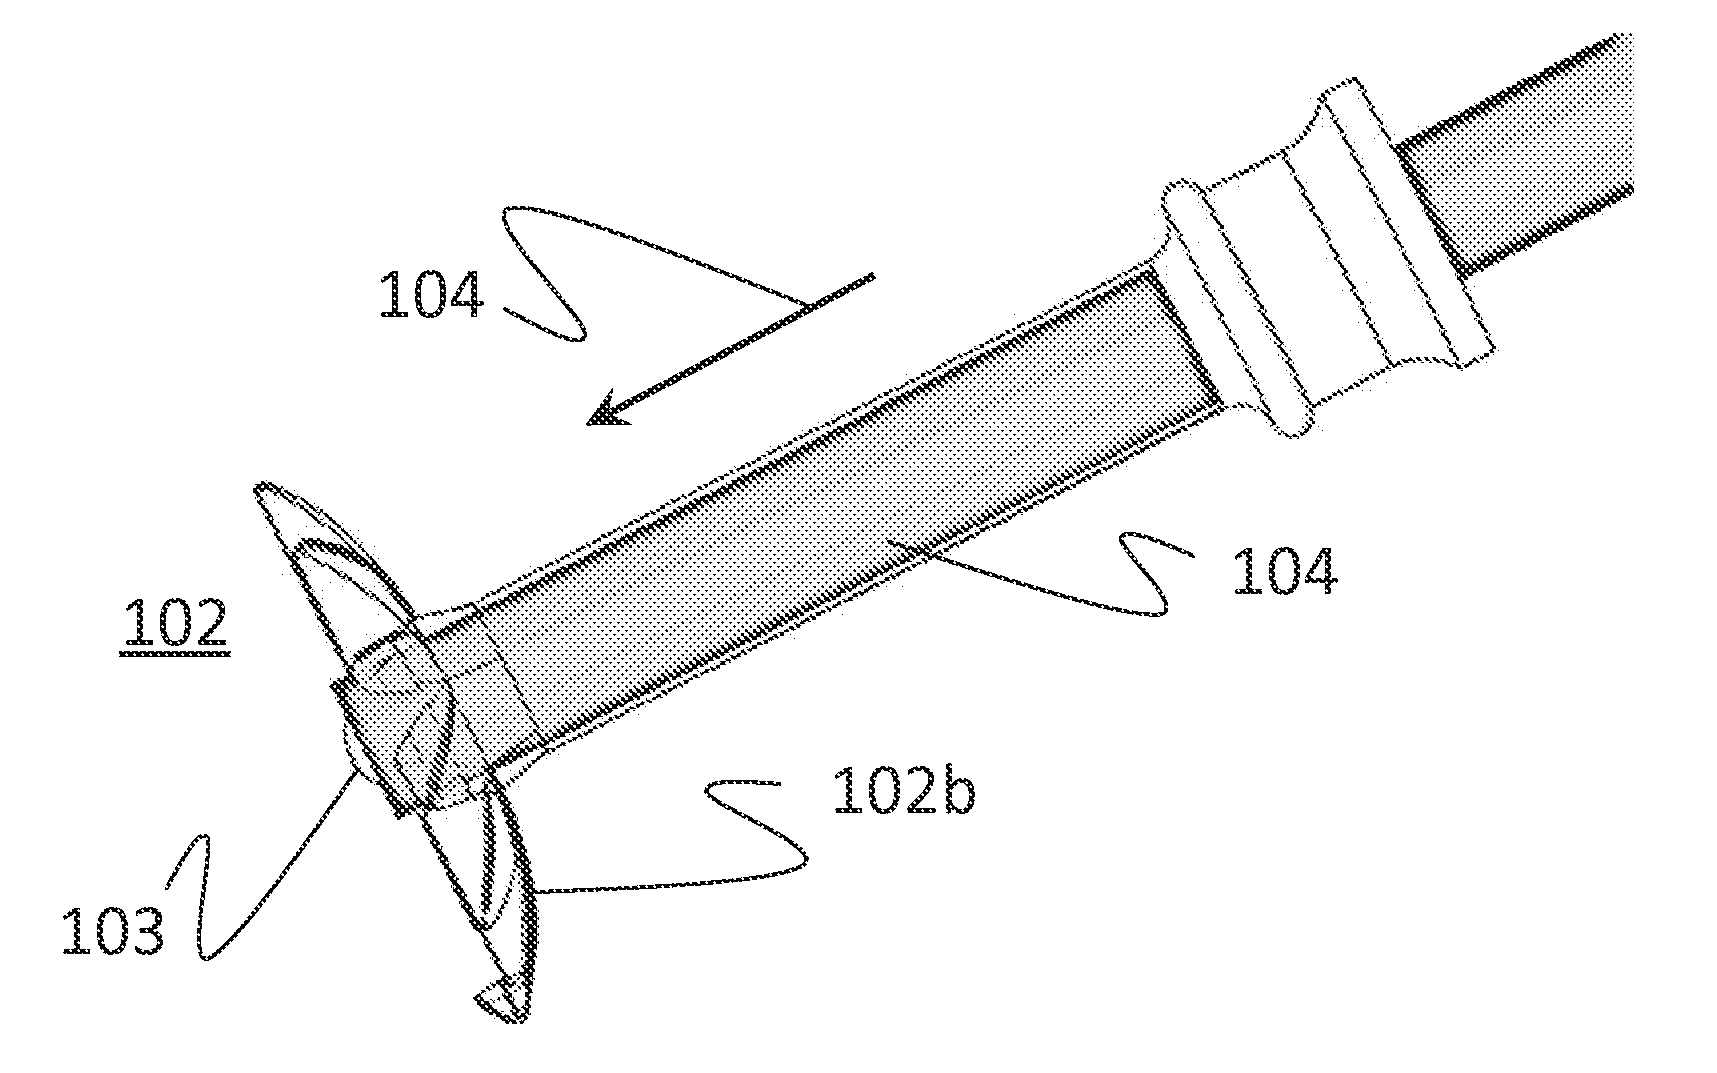 Merged trocar-obturator device for optical-entry in minimally invasive surgery